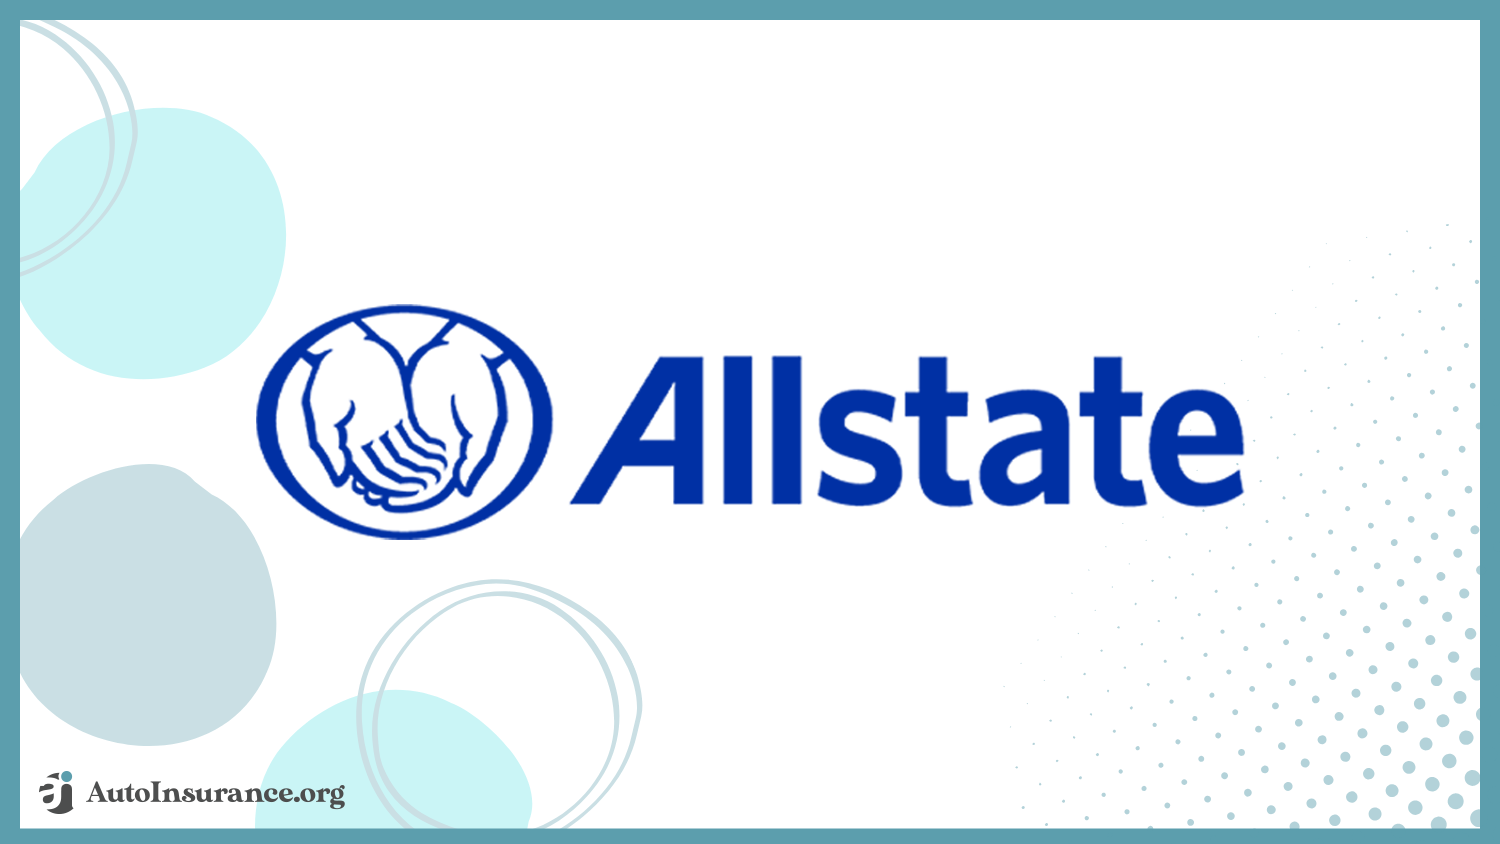 best auto insurance for emergency service workers: Allstate